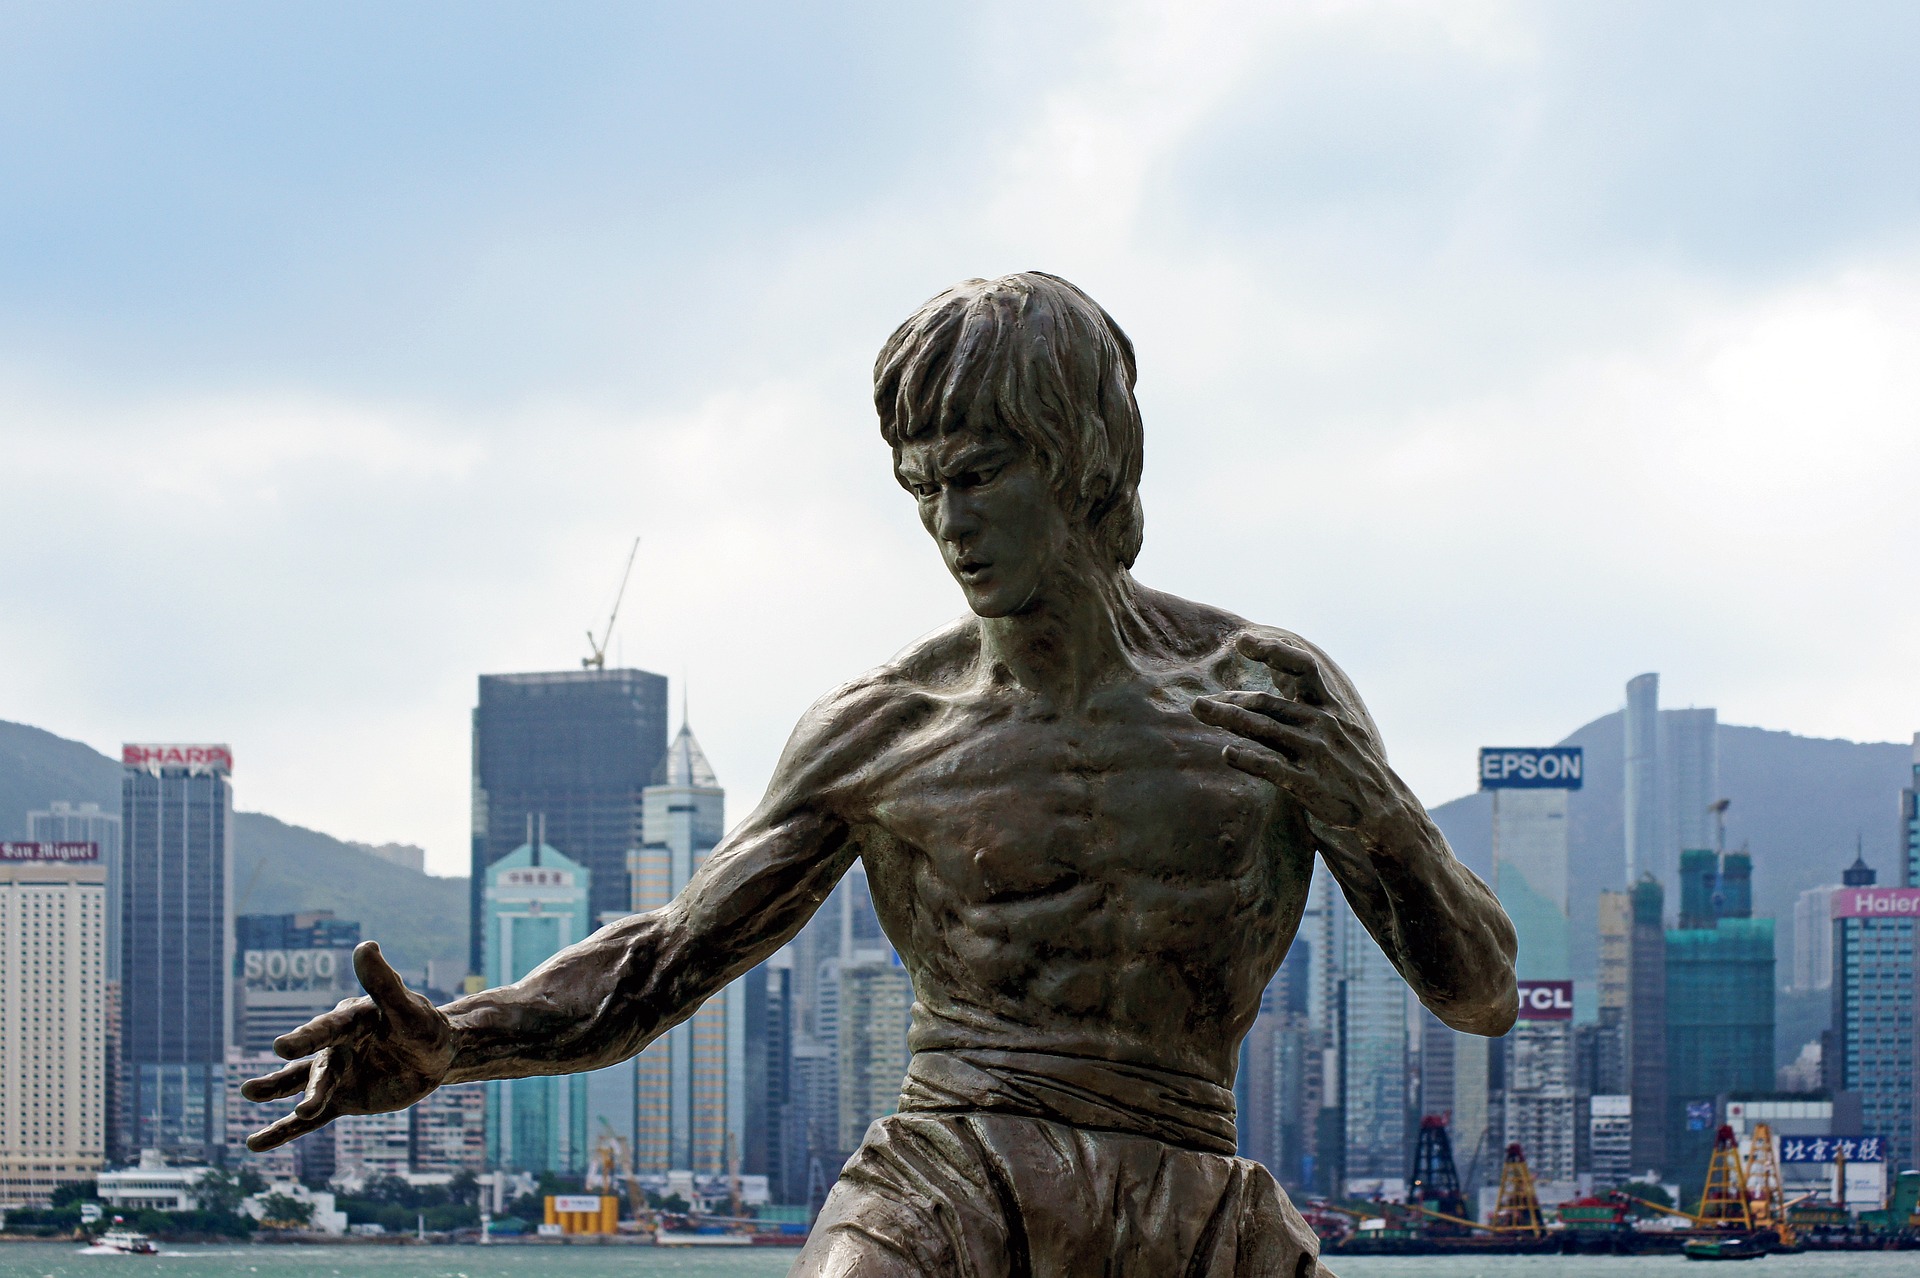 Bruce Lee passed 36 years ago